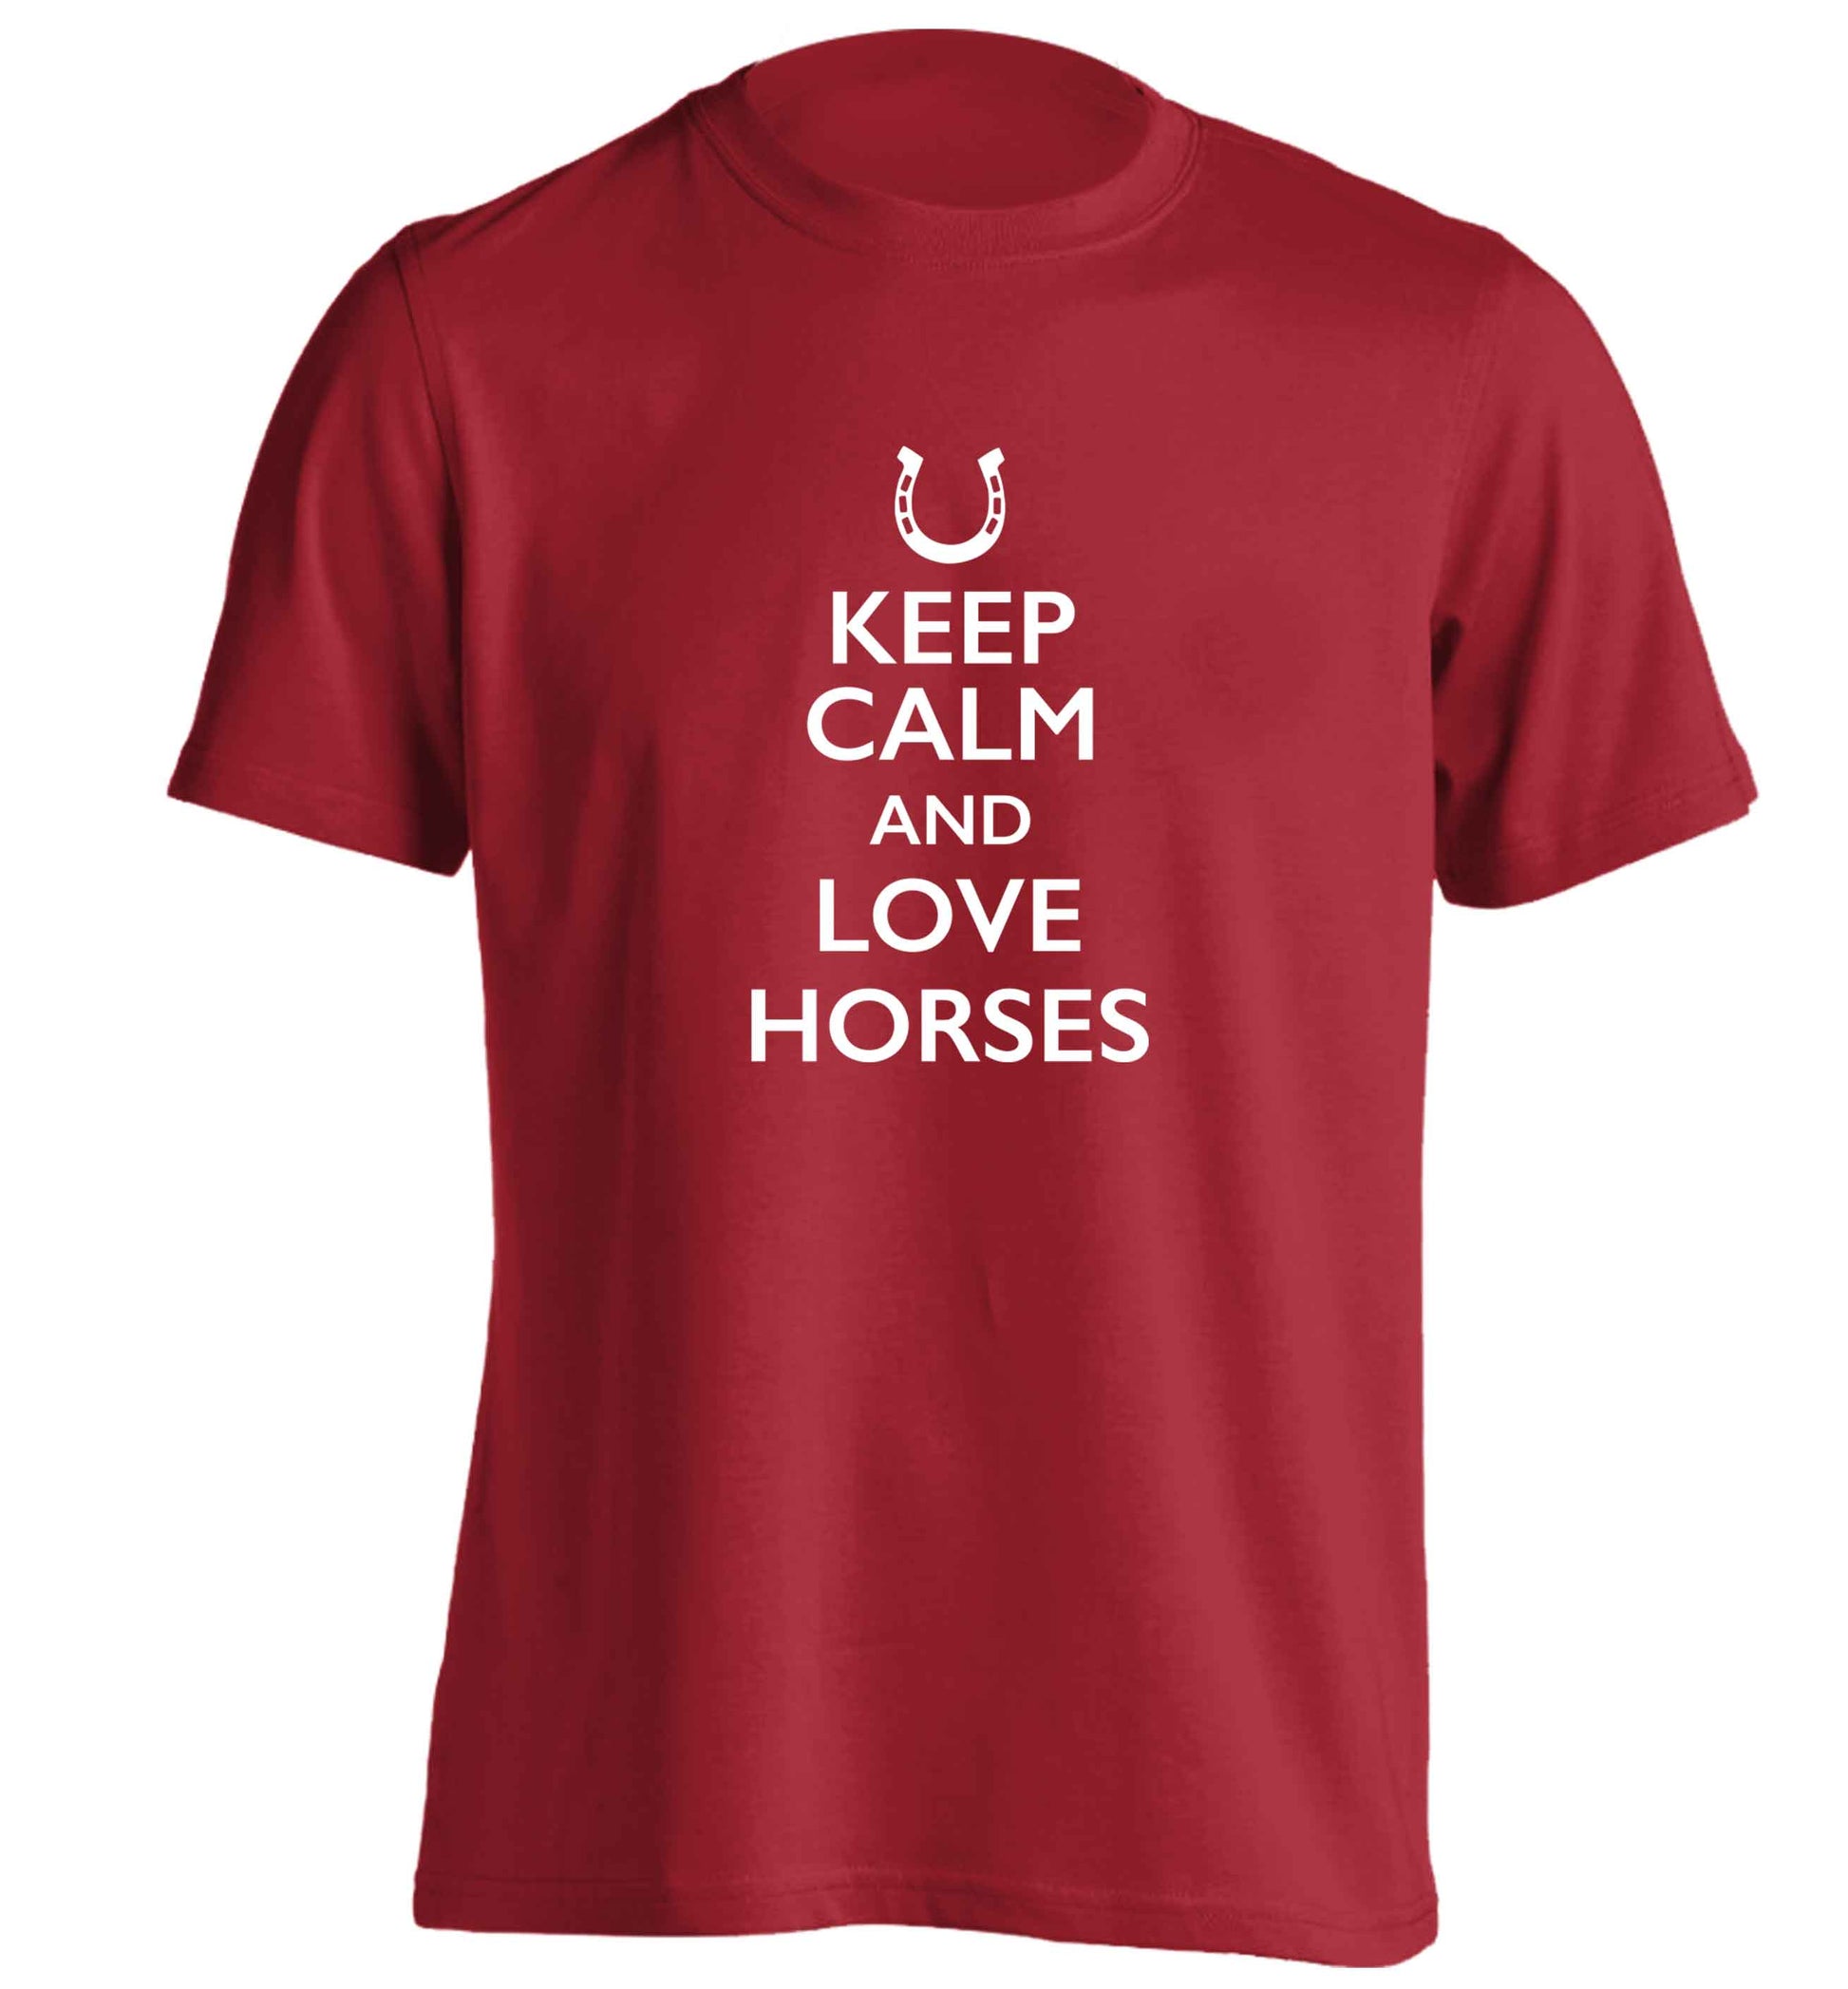 Keep calm and love horses adults unisex red Tshirt 2XL